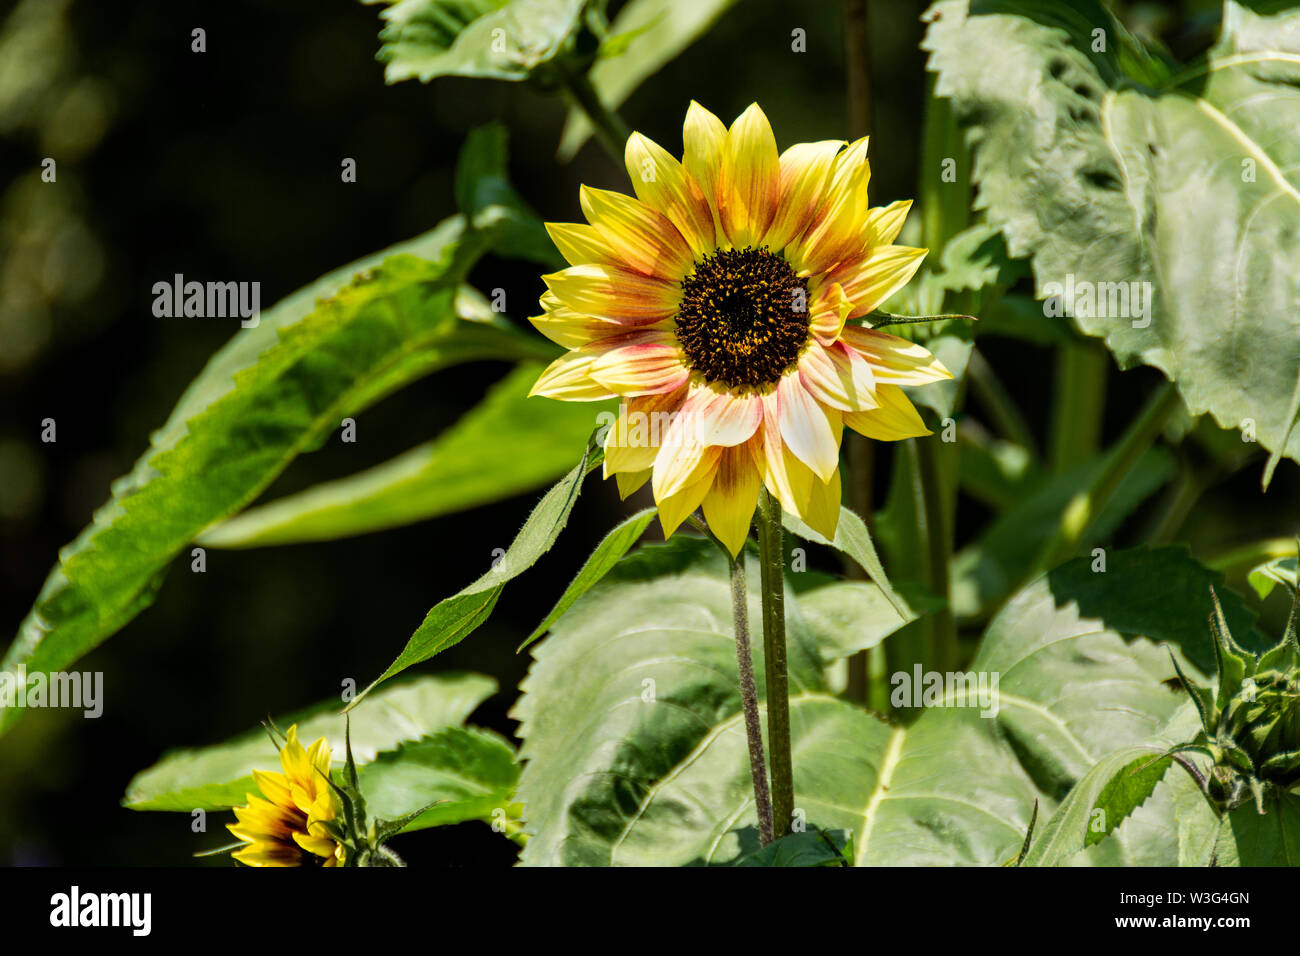 Common Sunflower growing outdoors in a botanical garden. Its Binomial name is Helianthus annuus. Sunflowers grow best in full sun. Stock Photo